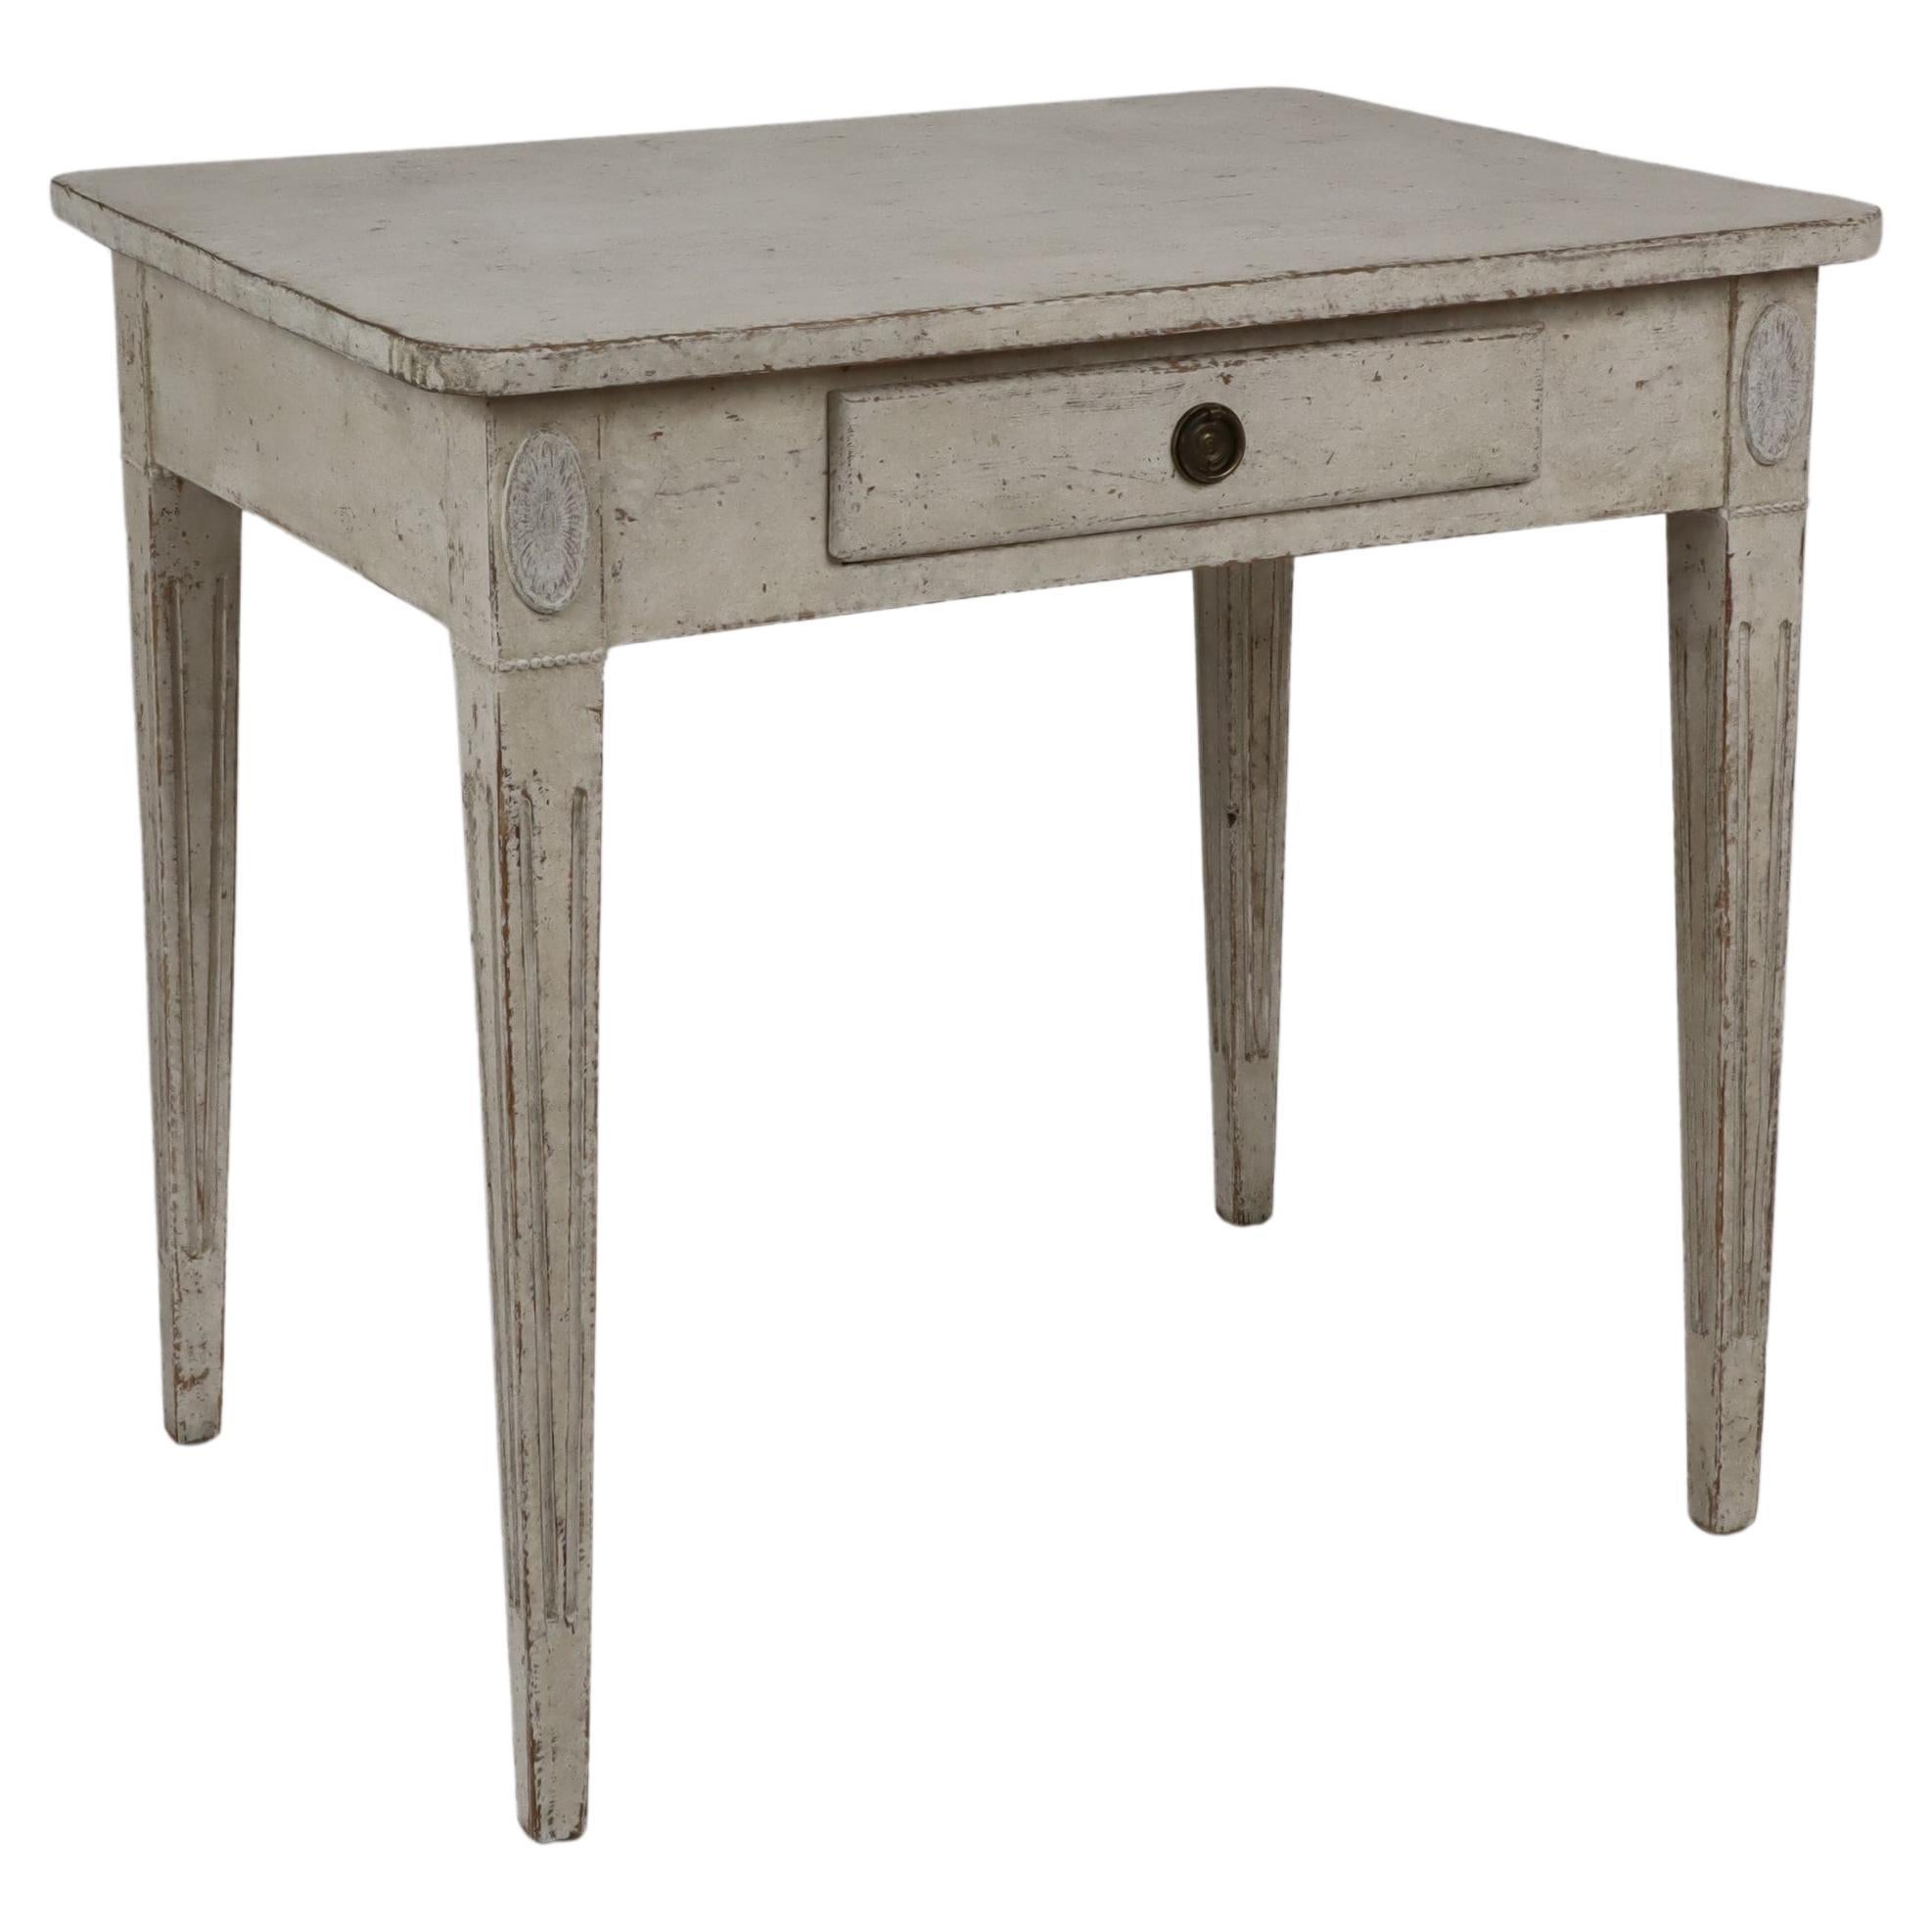 Swedish Gustavian Style 1850s Painted Desk with Single Drawer and Tapered Legs For Sale